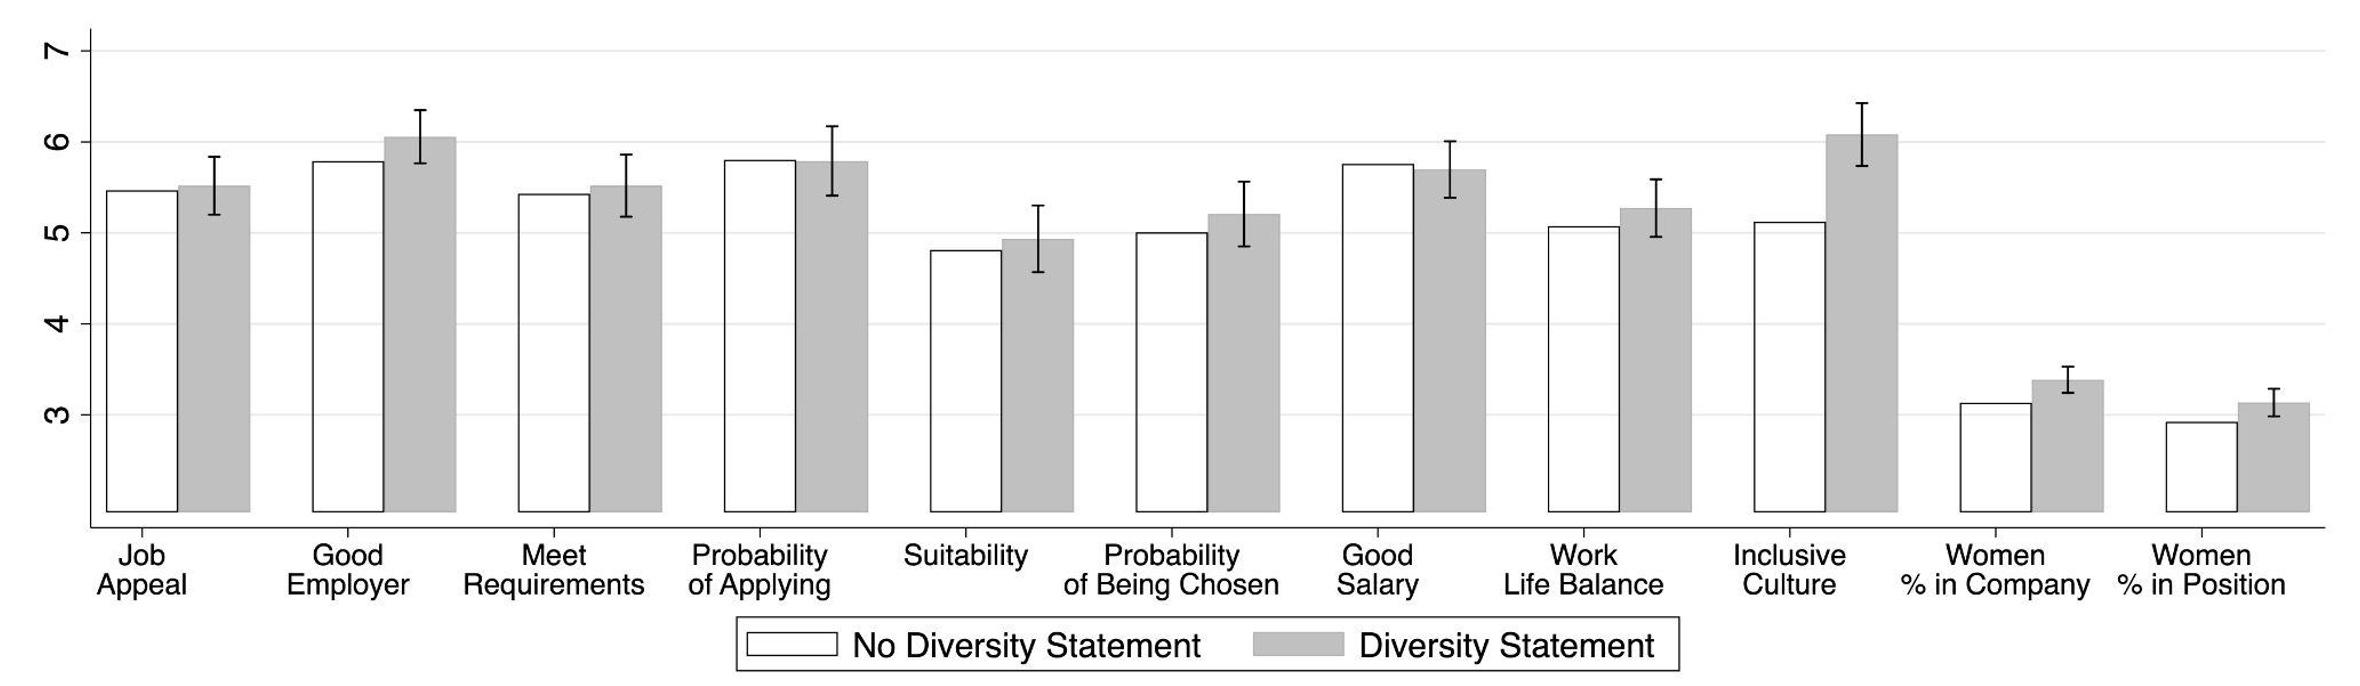 B) Ads with diversity statements versus those without